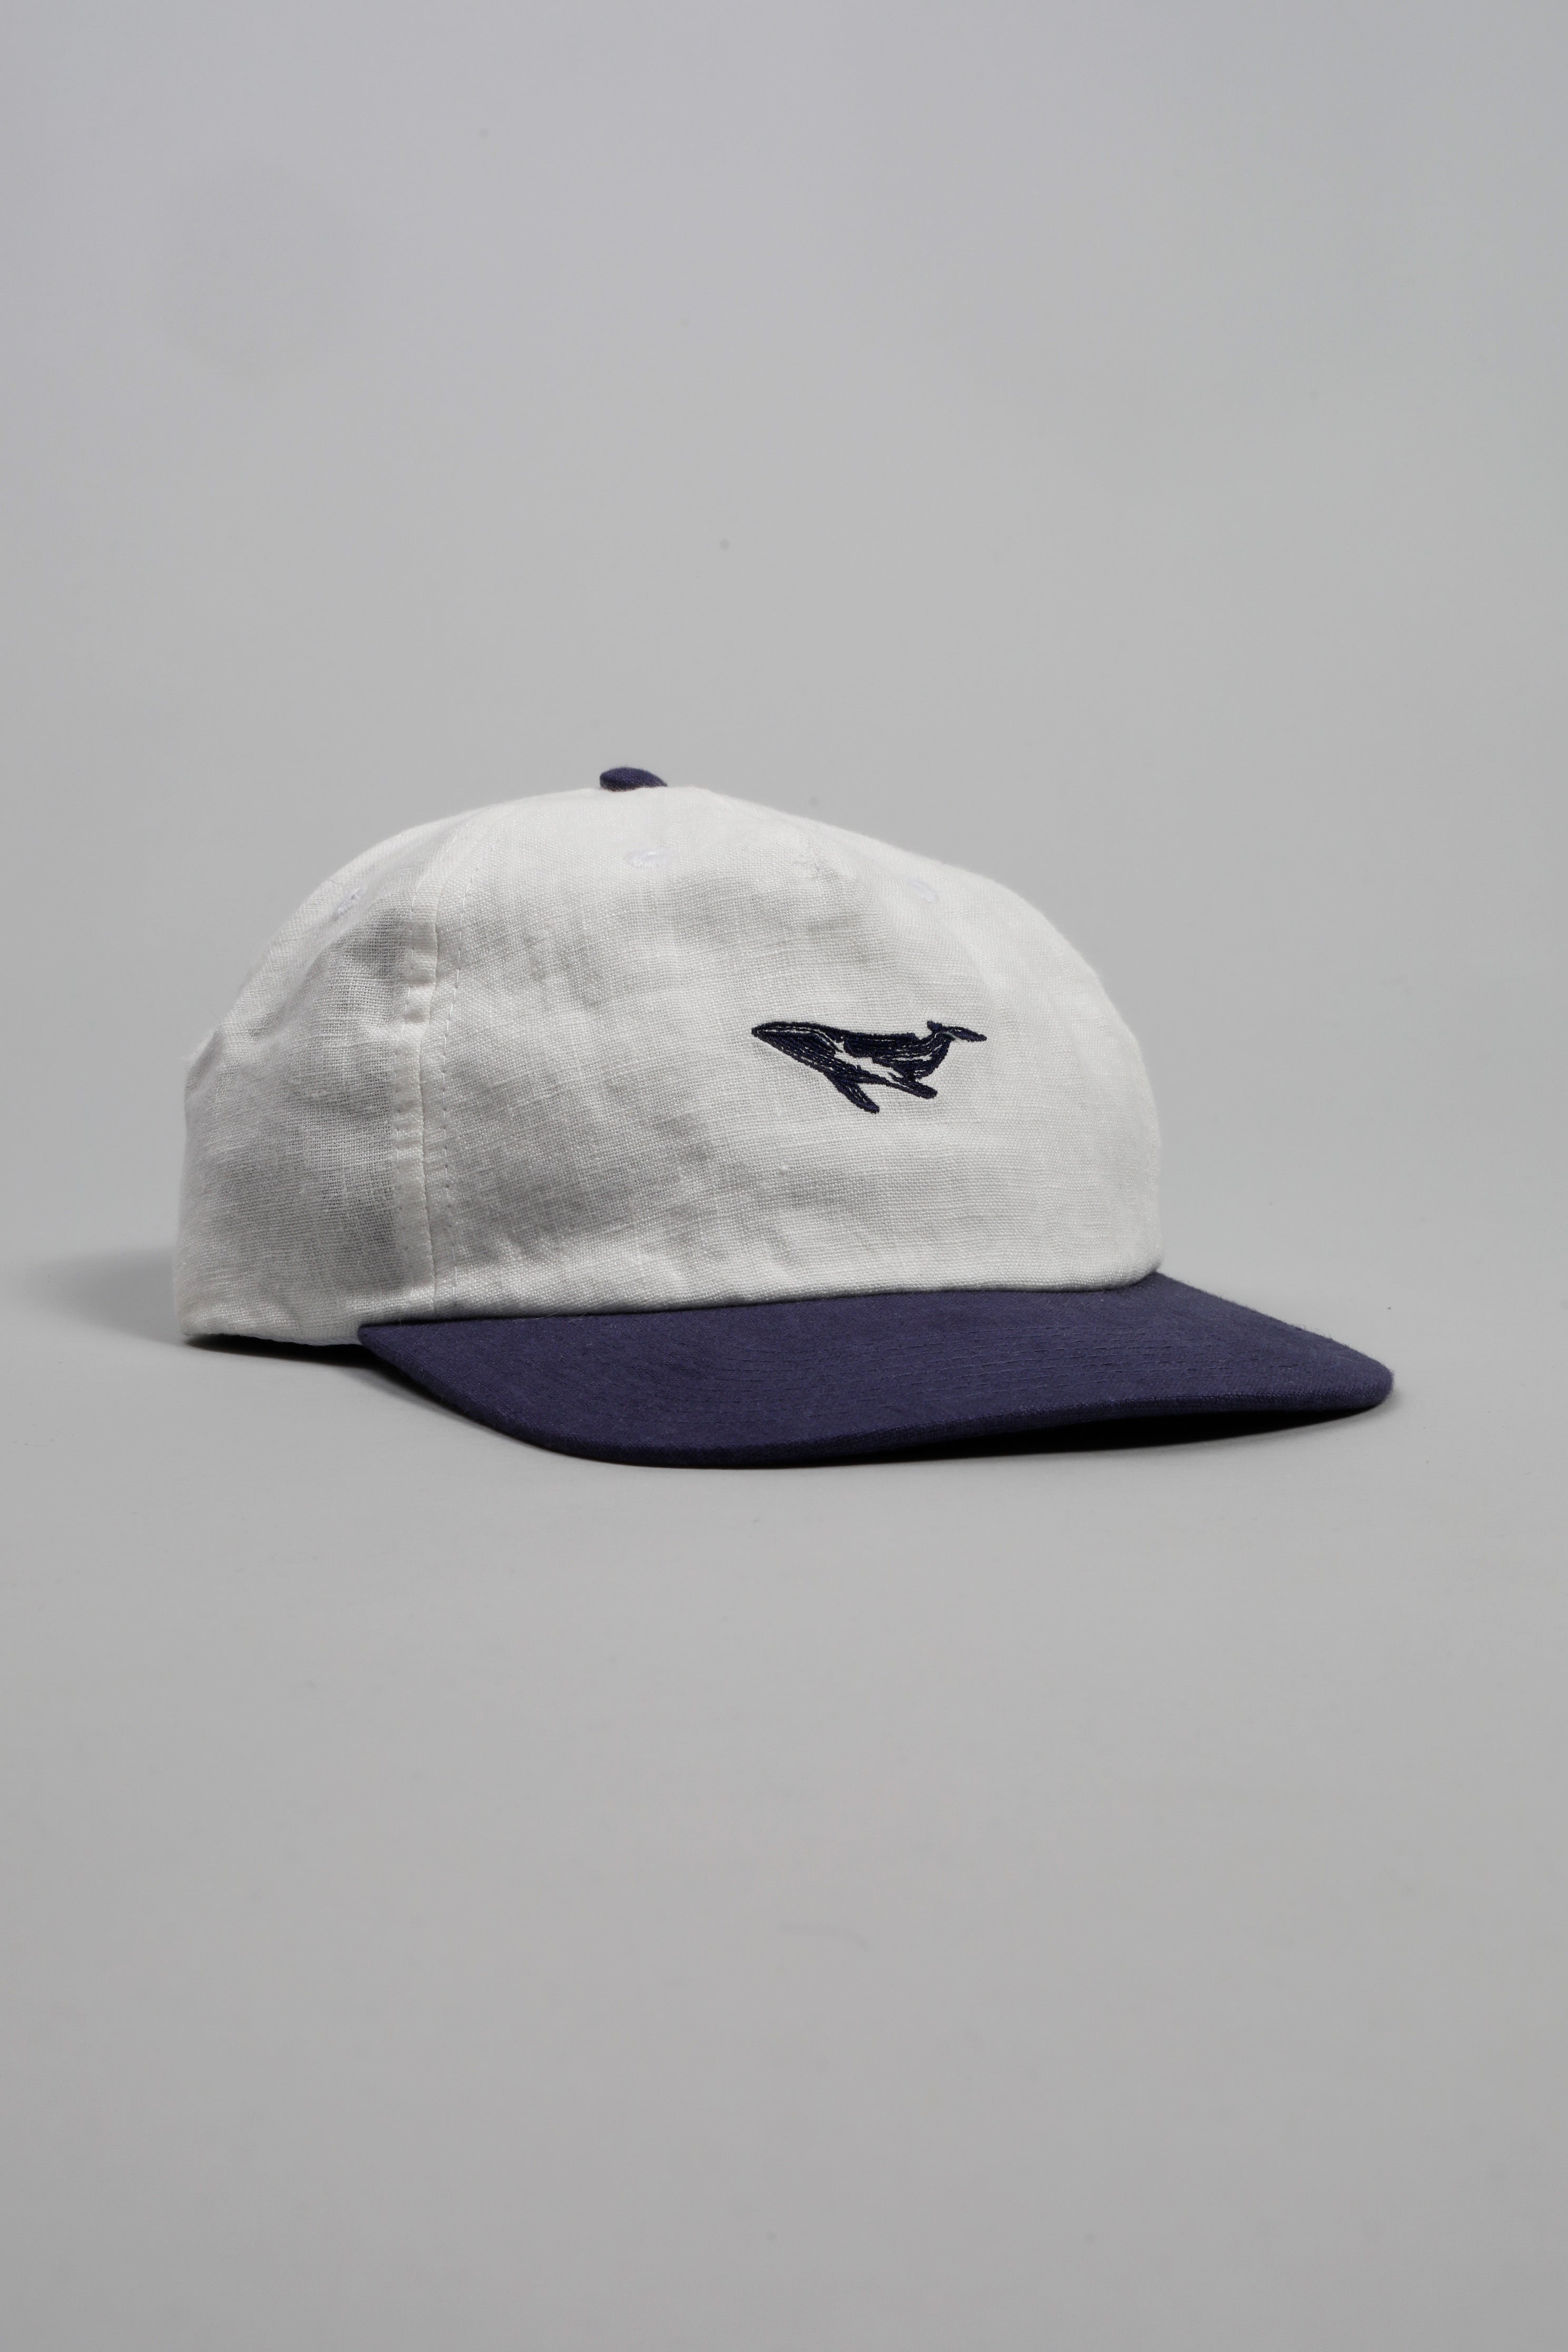 Blue Whale – Tidy Hat Company